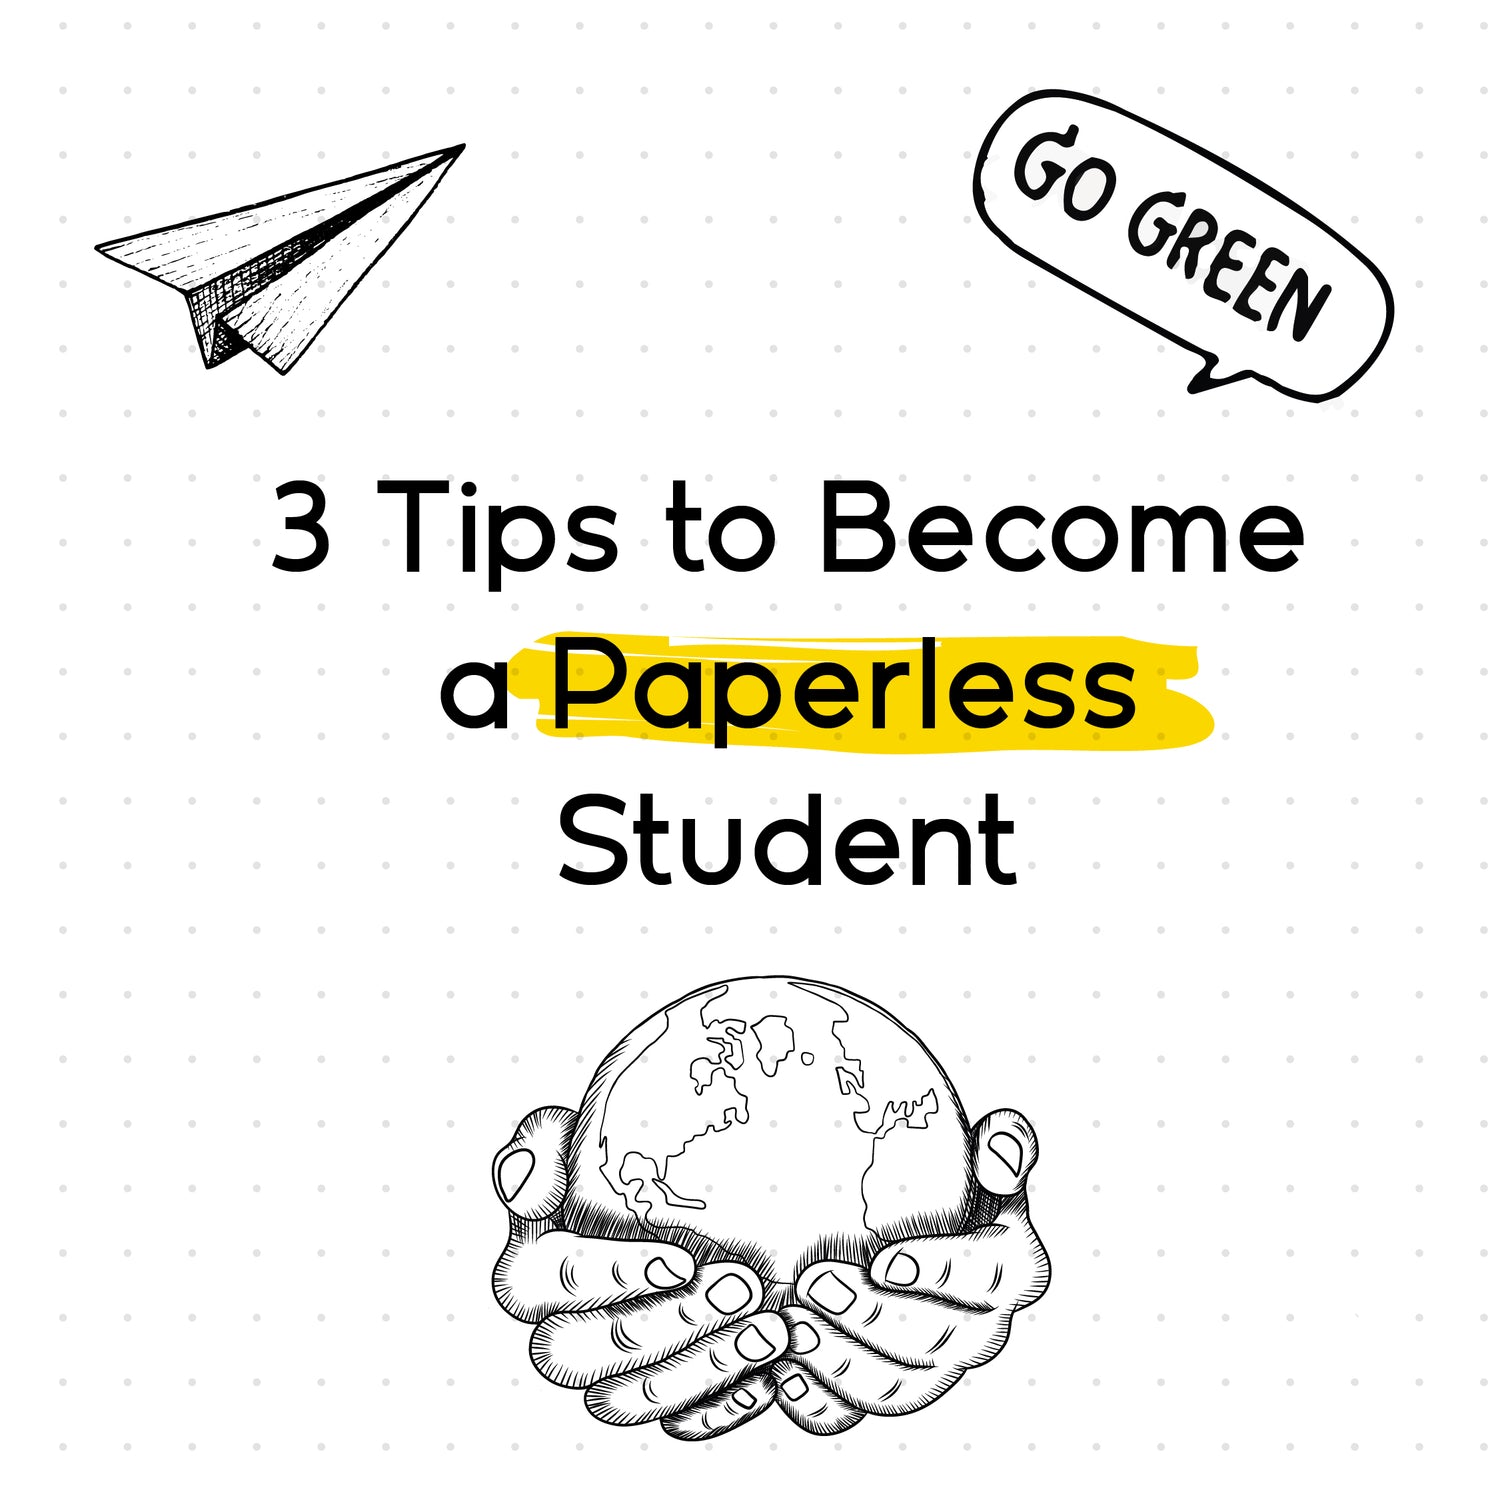 3 tips to become a paperless student